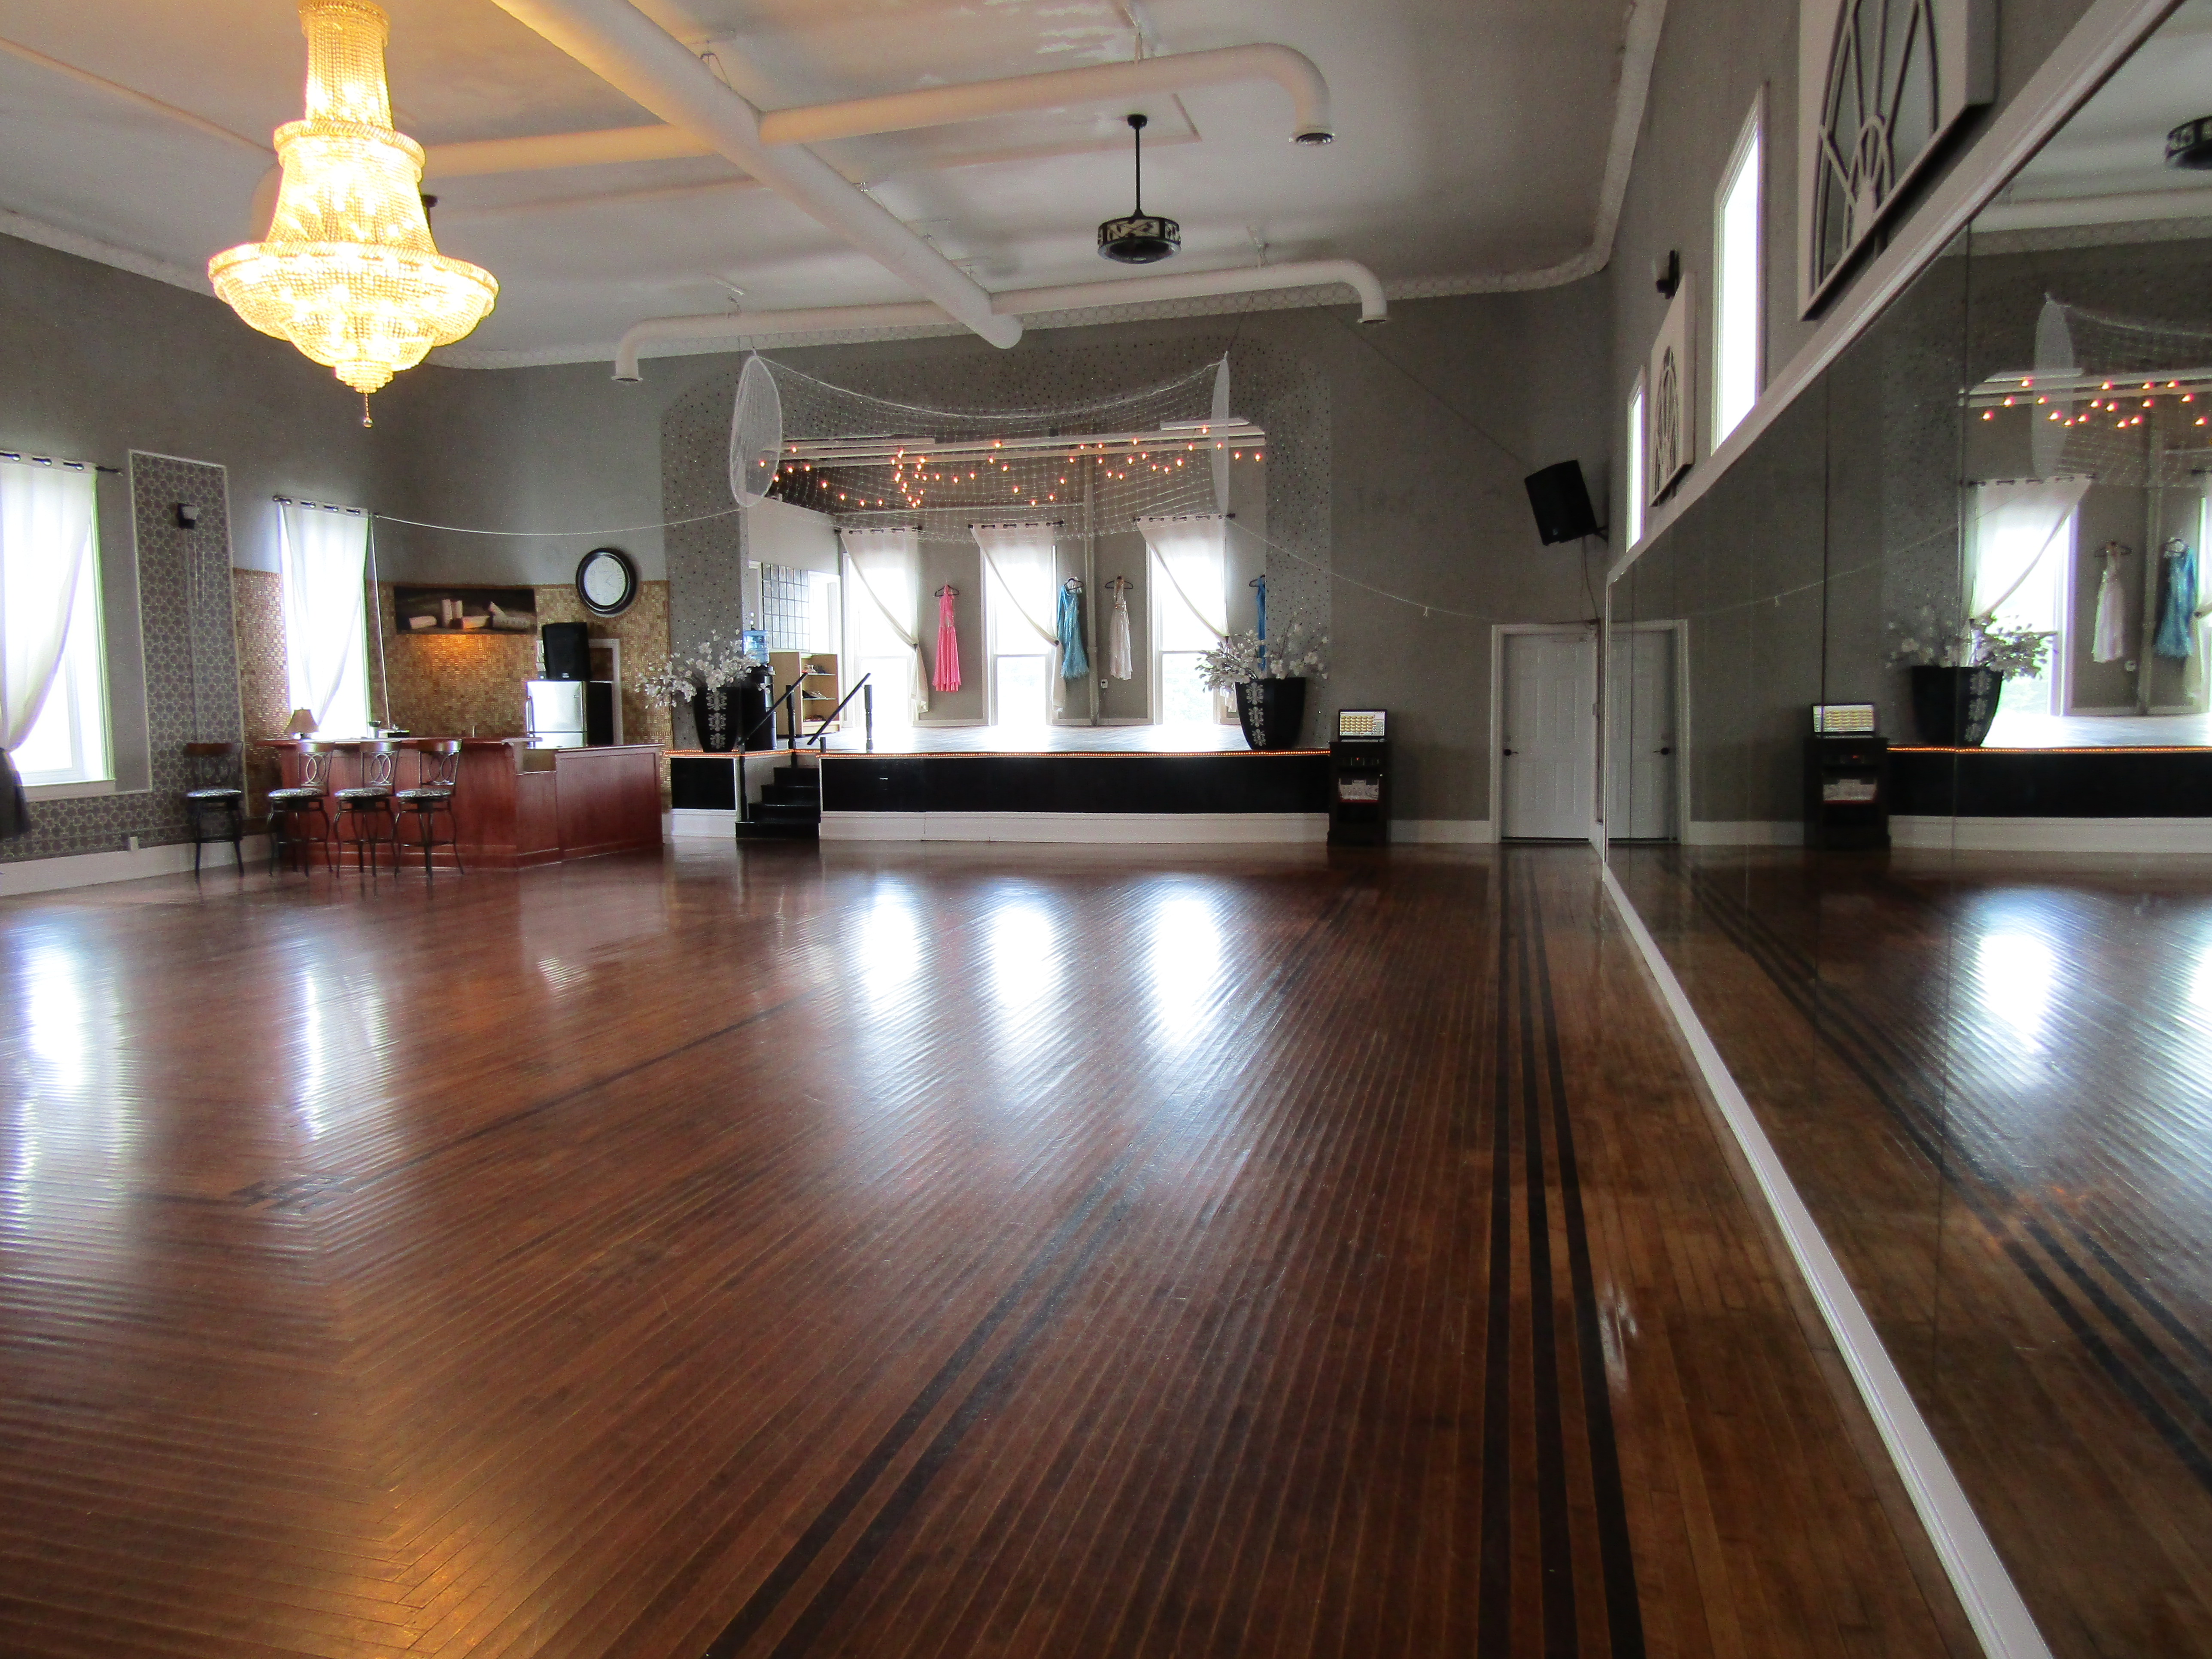 Large Ballroom West View